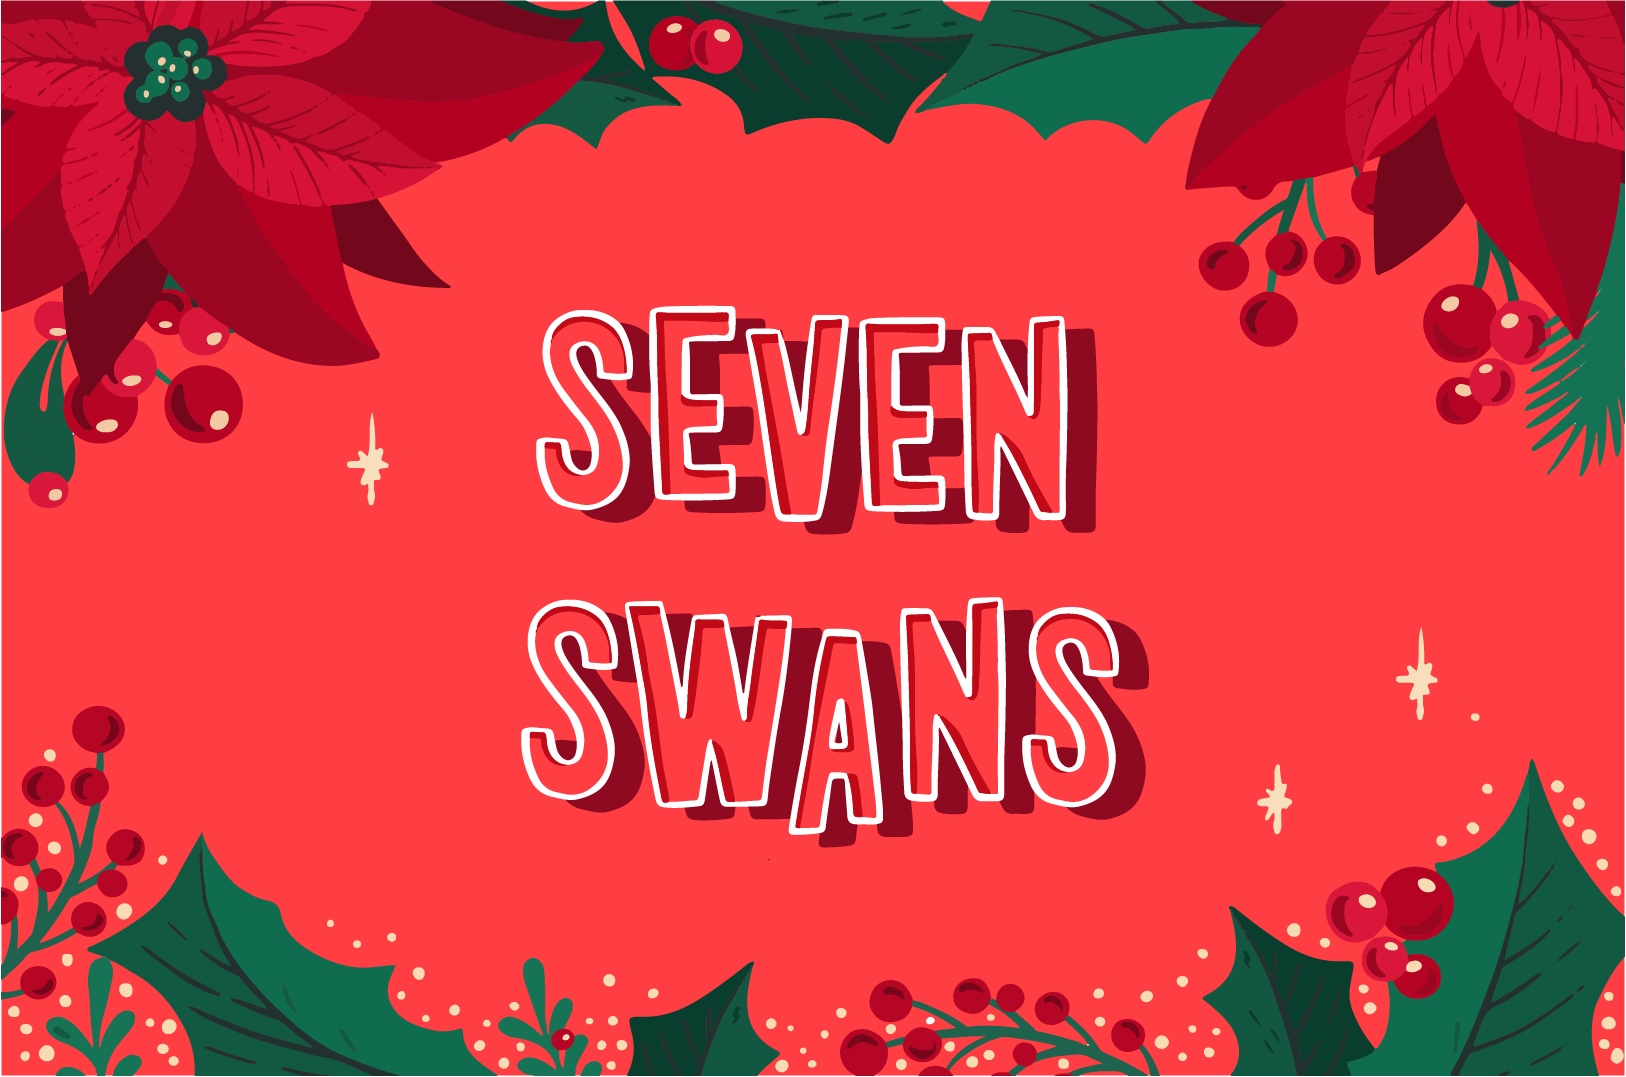 Shop small: Five treasure-hunt gems on the whimsical shelves of Seven Swans